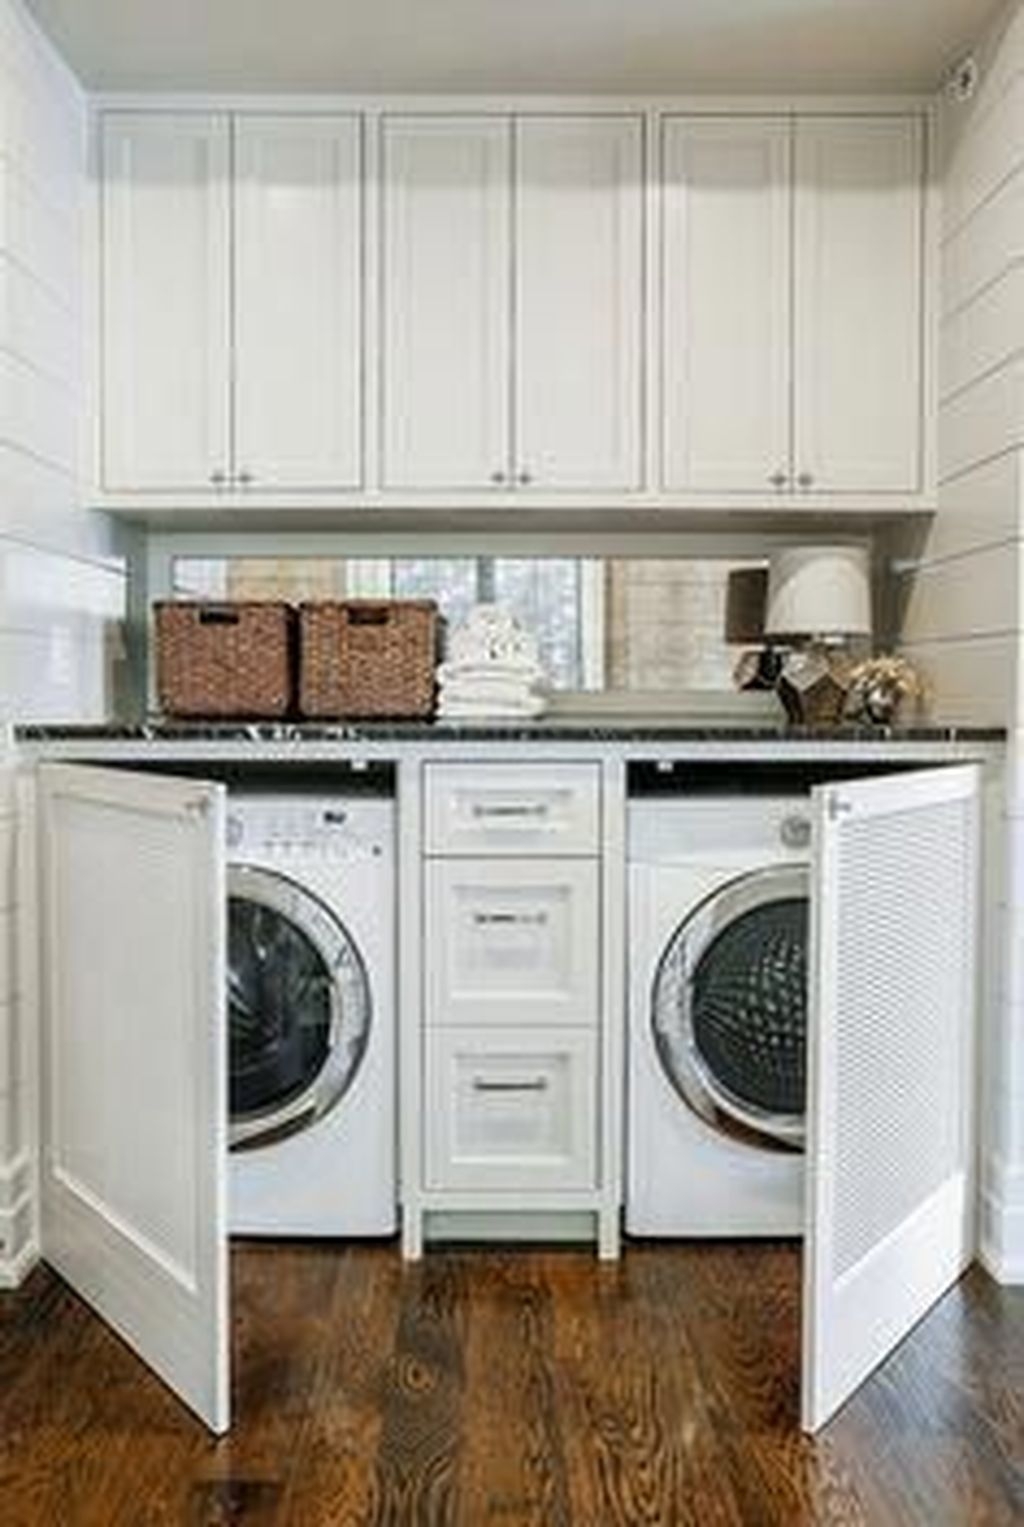 Inspiring Laundry Room Design With French Country Style 13